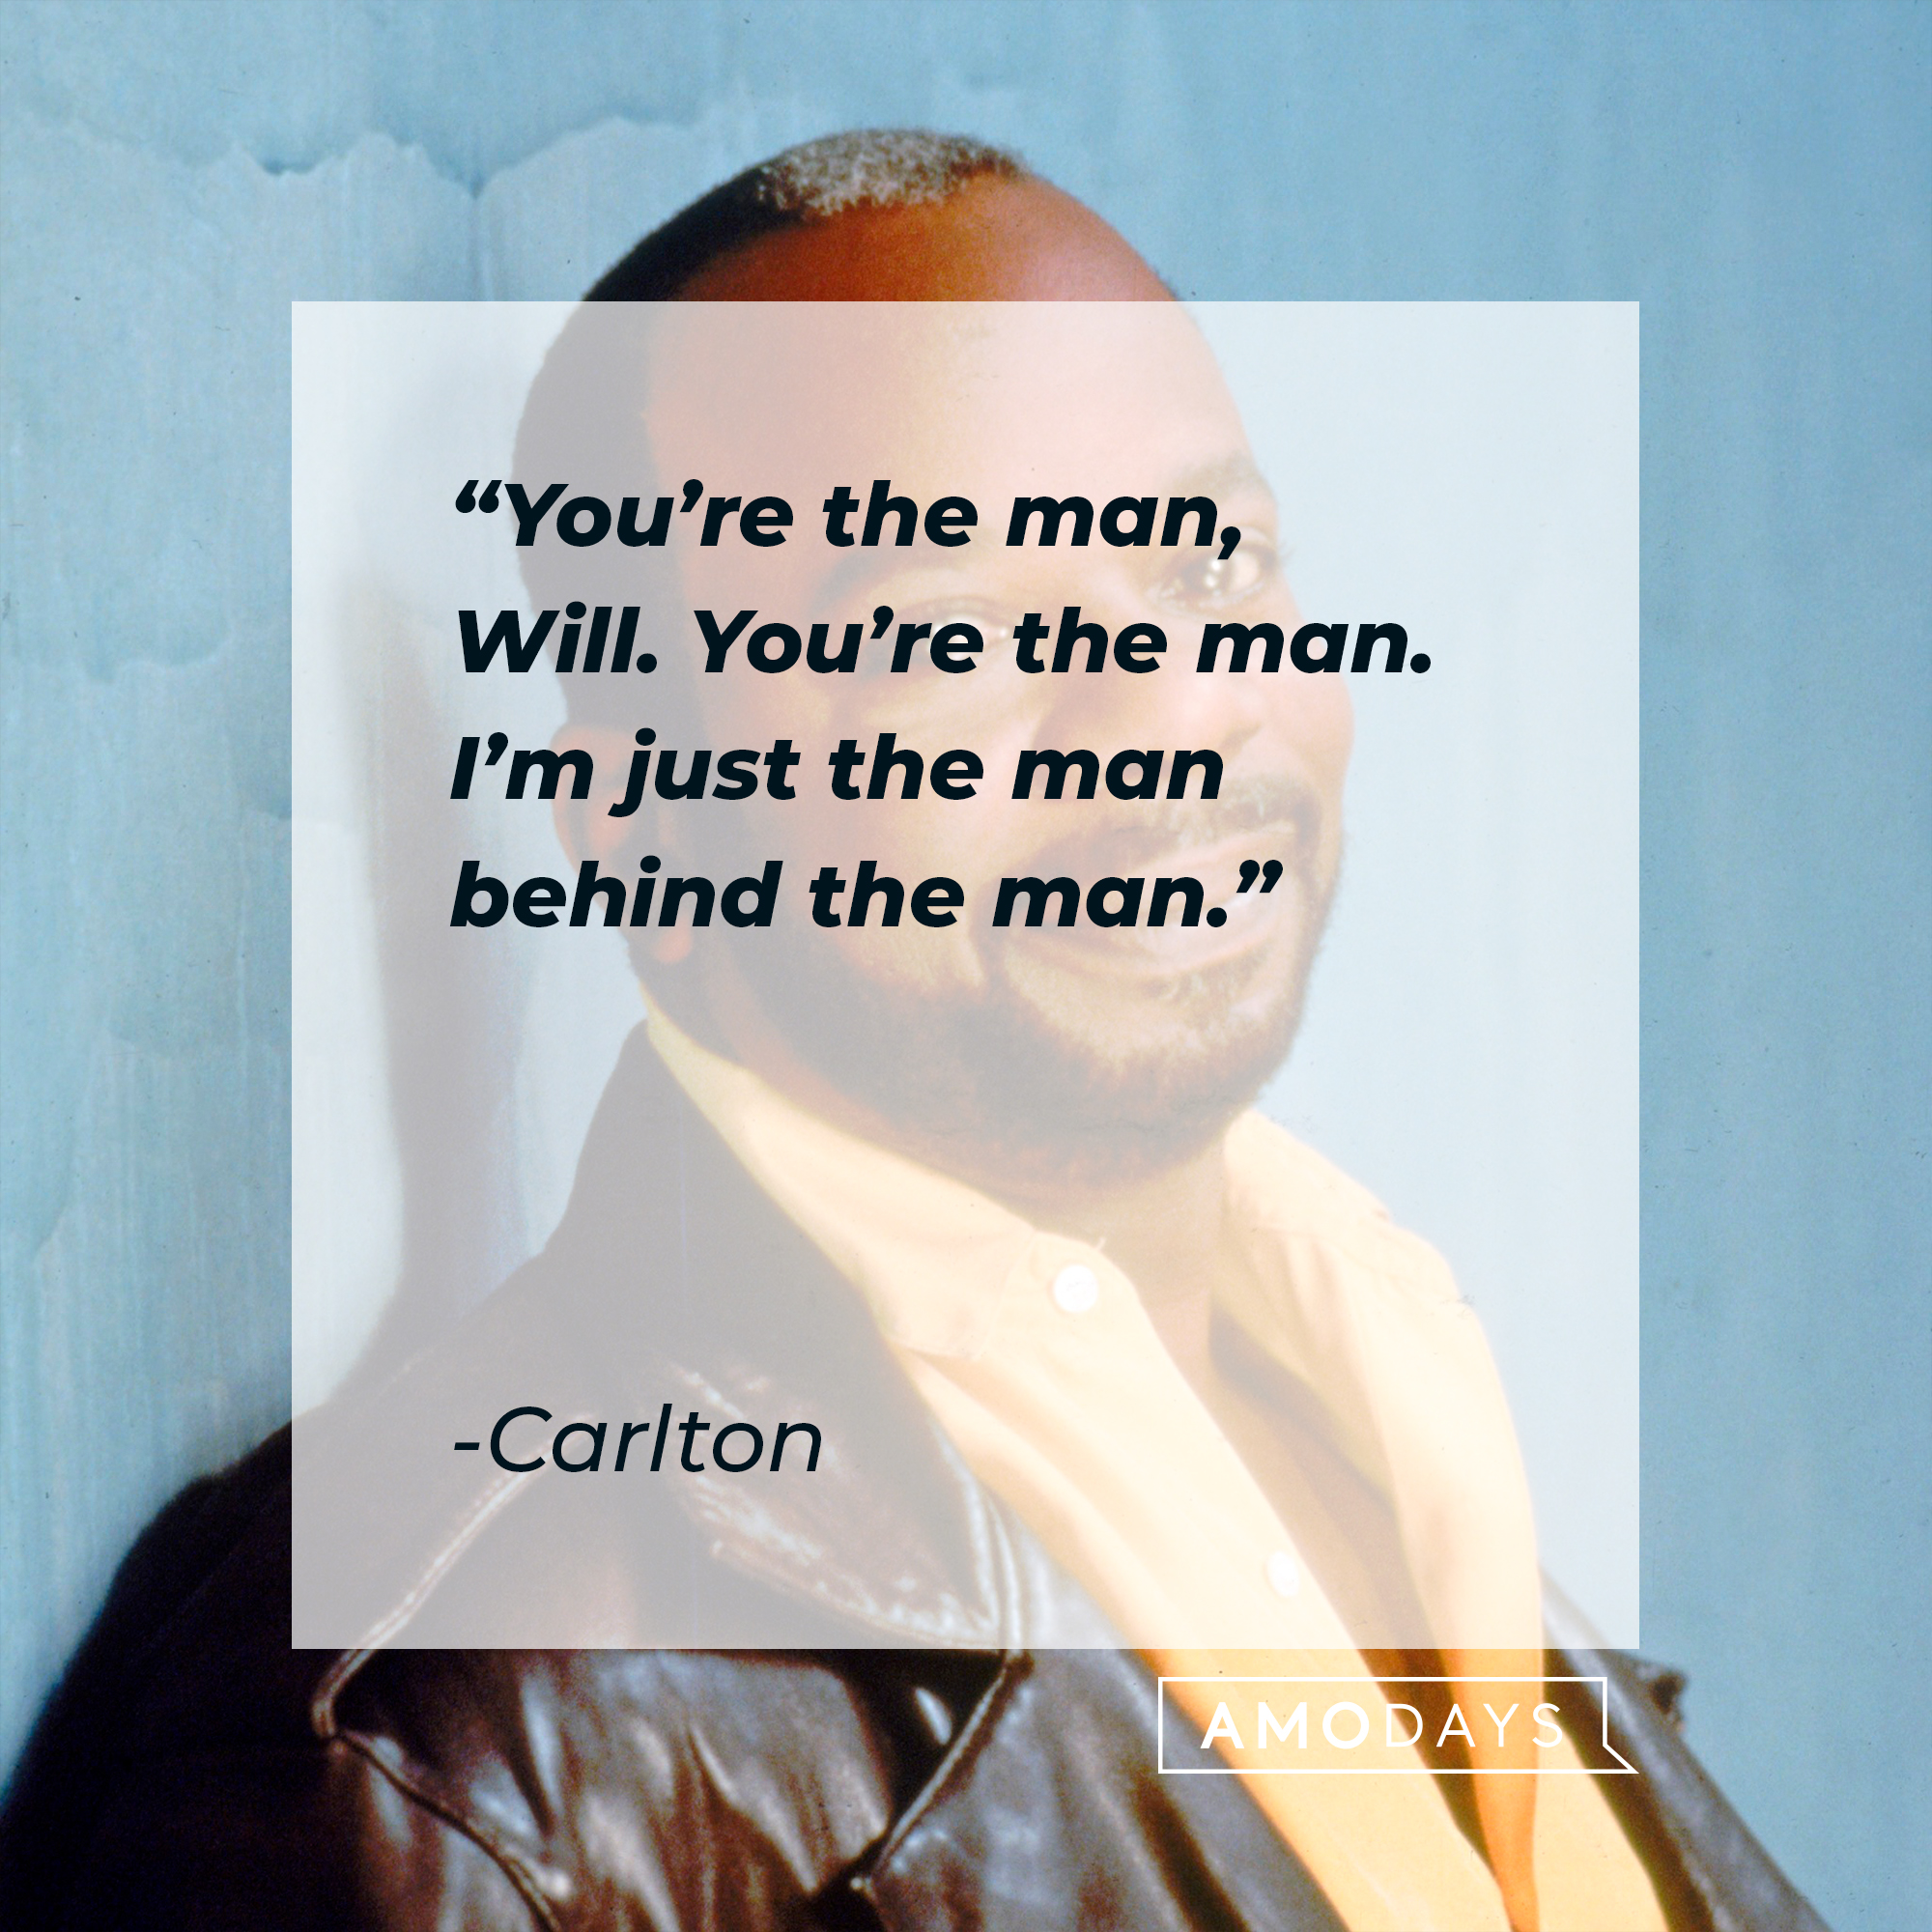 A picture of Geoffrey with Carlton’s quote“You’re the man, Will. You’re the man. I’m just the man behind the man.”  | Source: facebook.com/TheFreshPrinceofBelAir